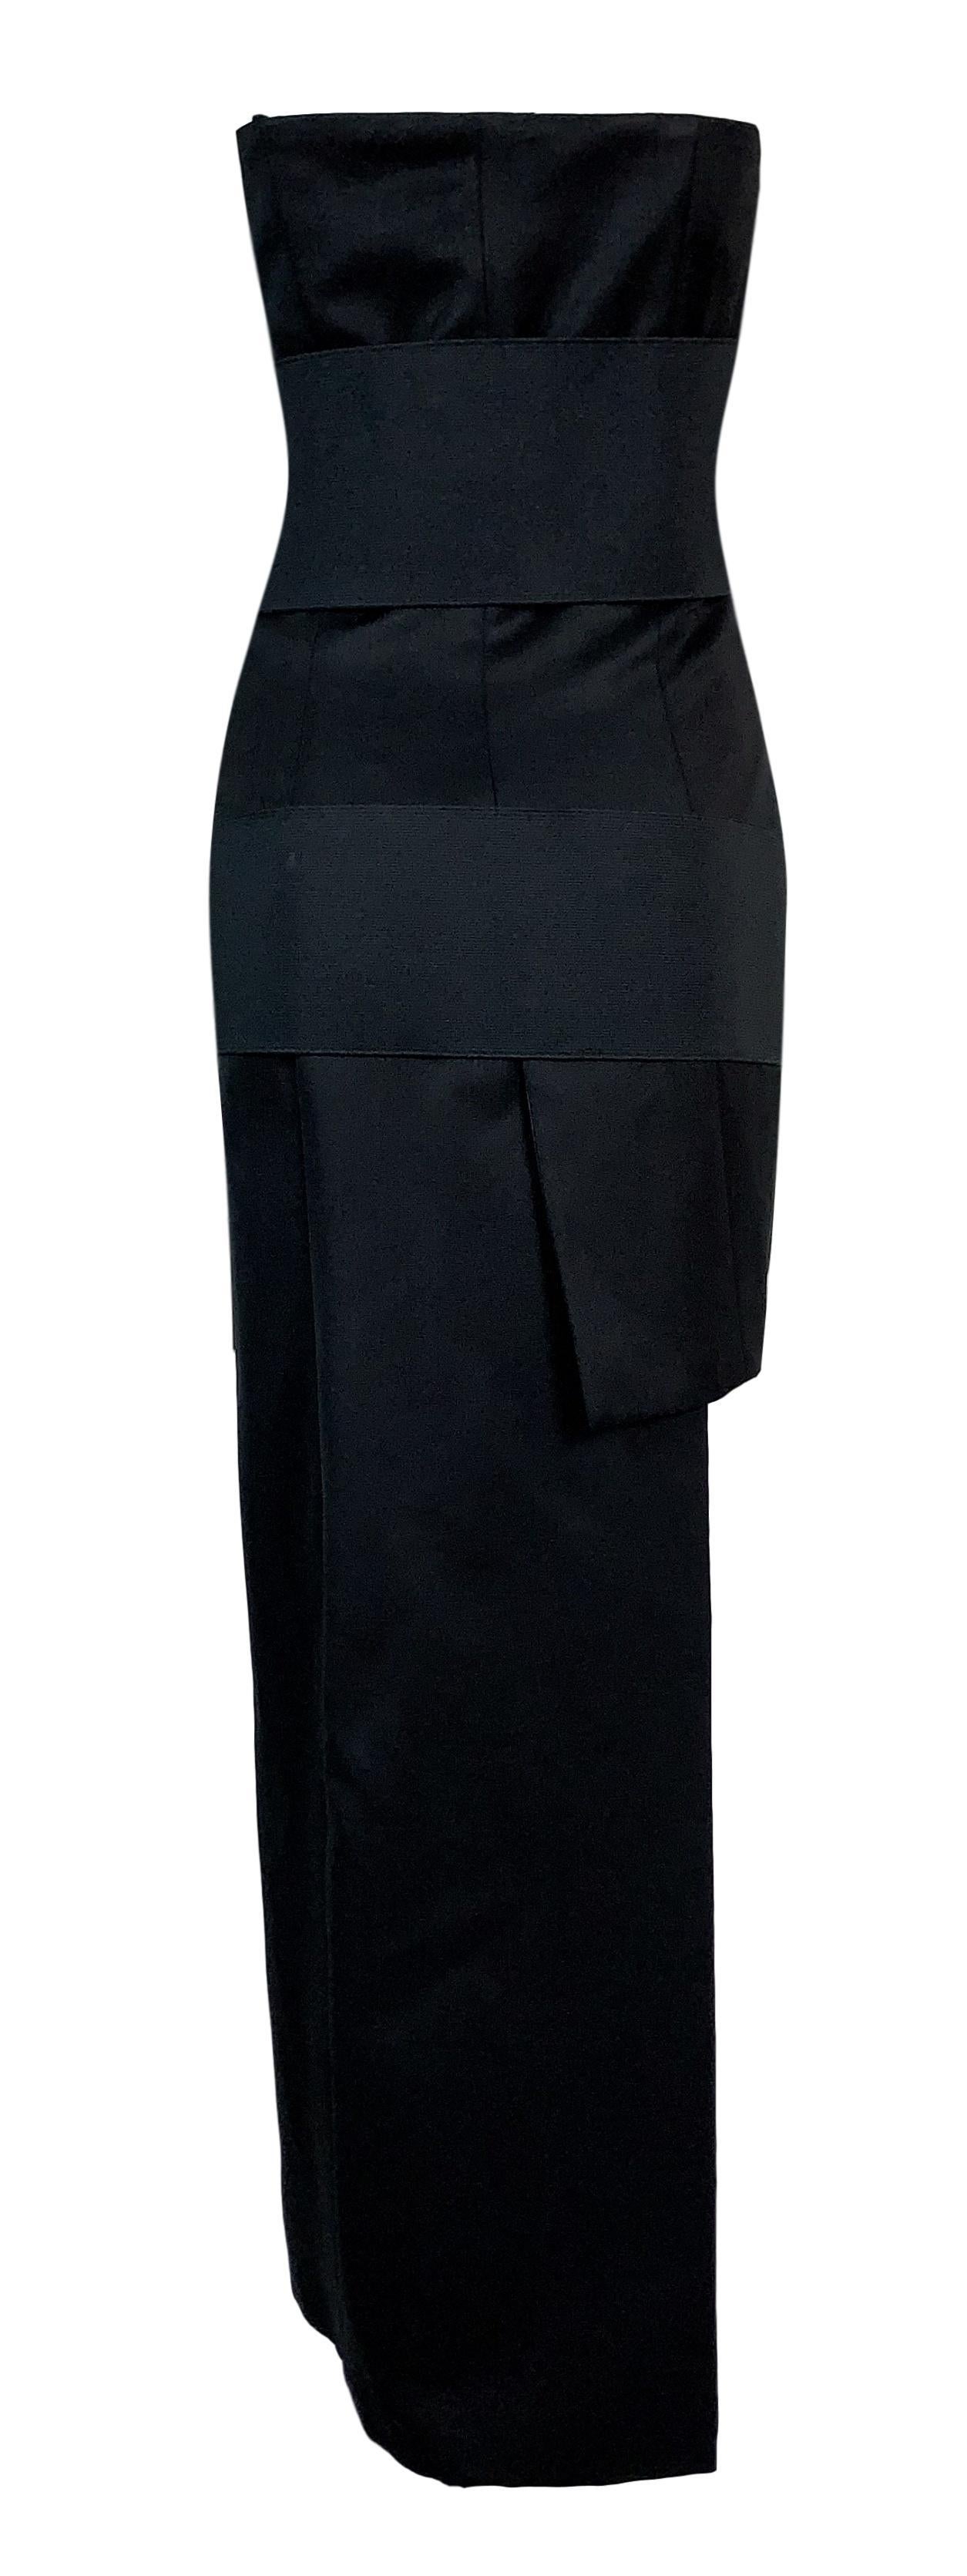 S/S 2001 Yves Saint Laurent by Tom Ford Black Bandage Wrap Hi-Low Mini Dress 36 In Good Condition In Yukon, OK